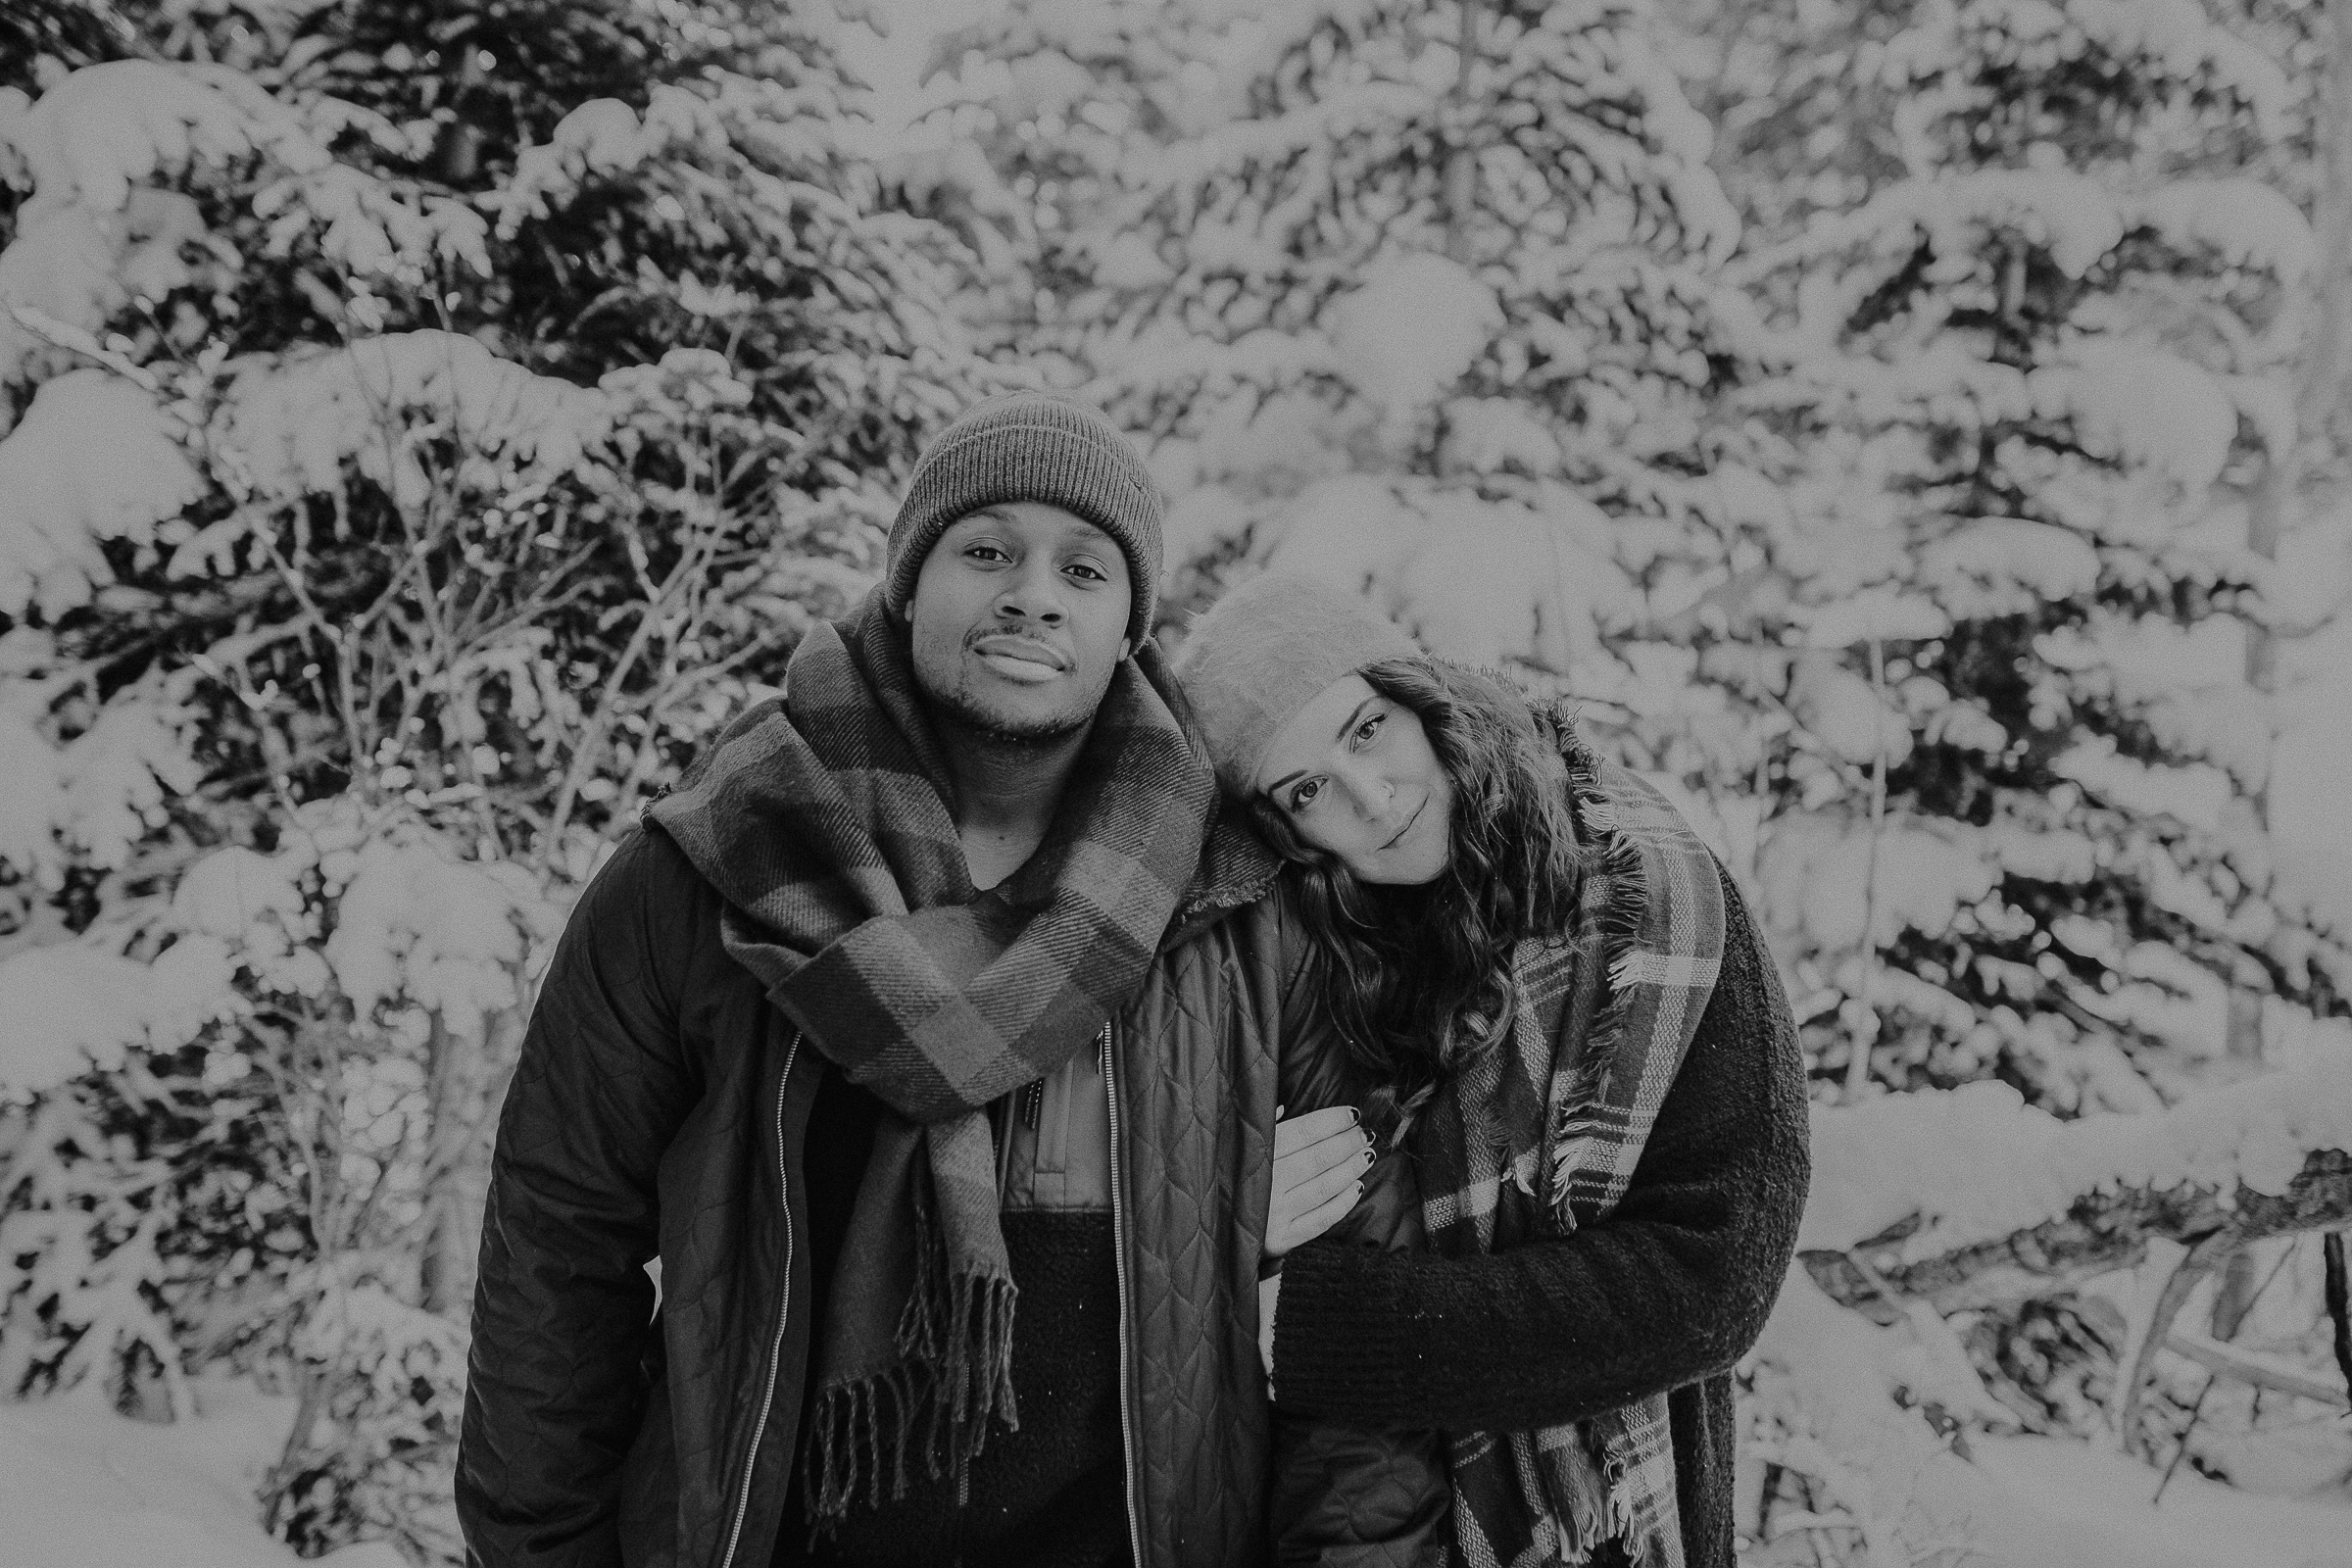 Couple standing together in snowy mountains